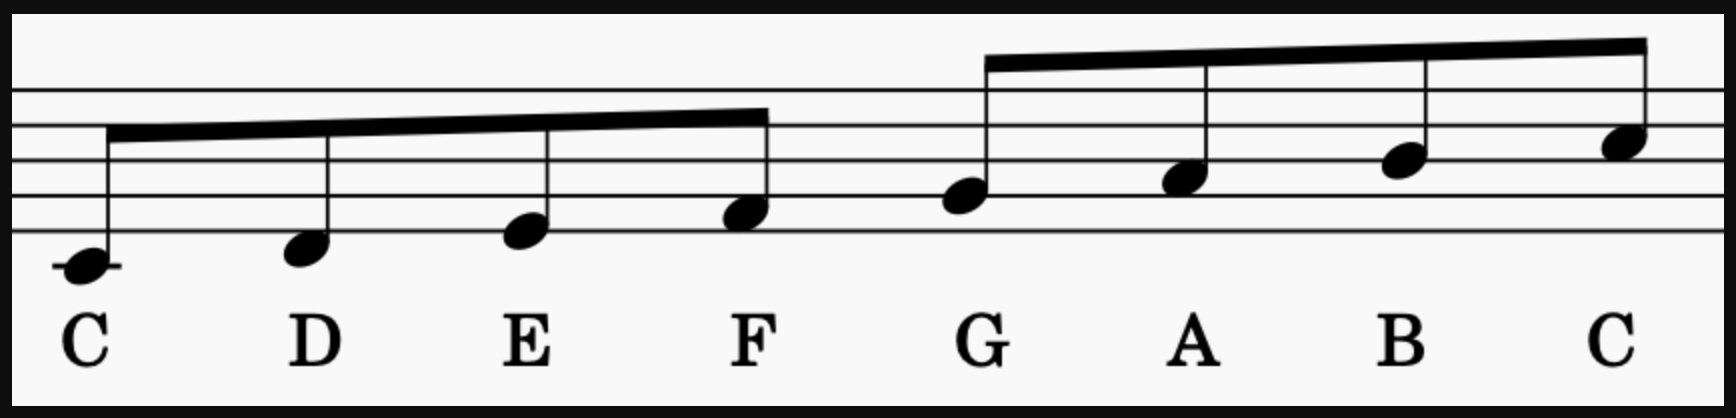 What Are Modes in Music? C Major Scale